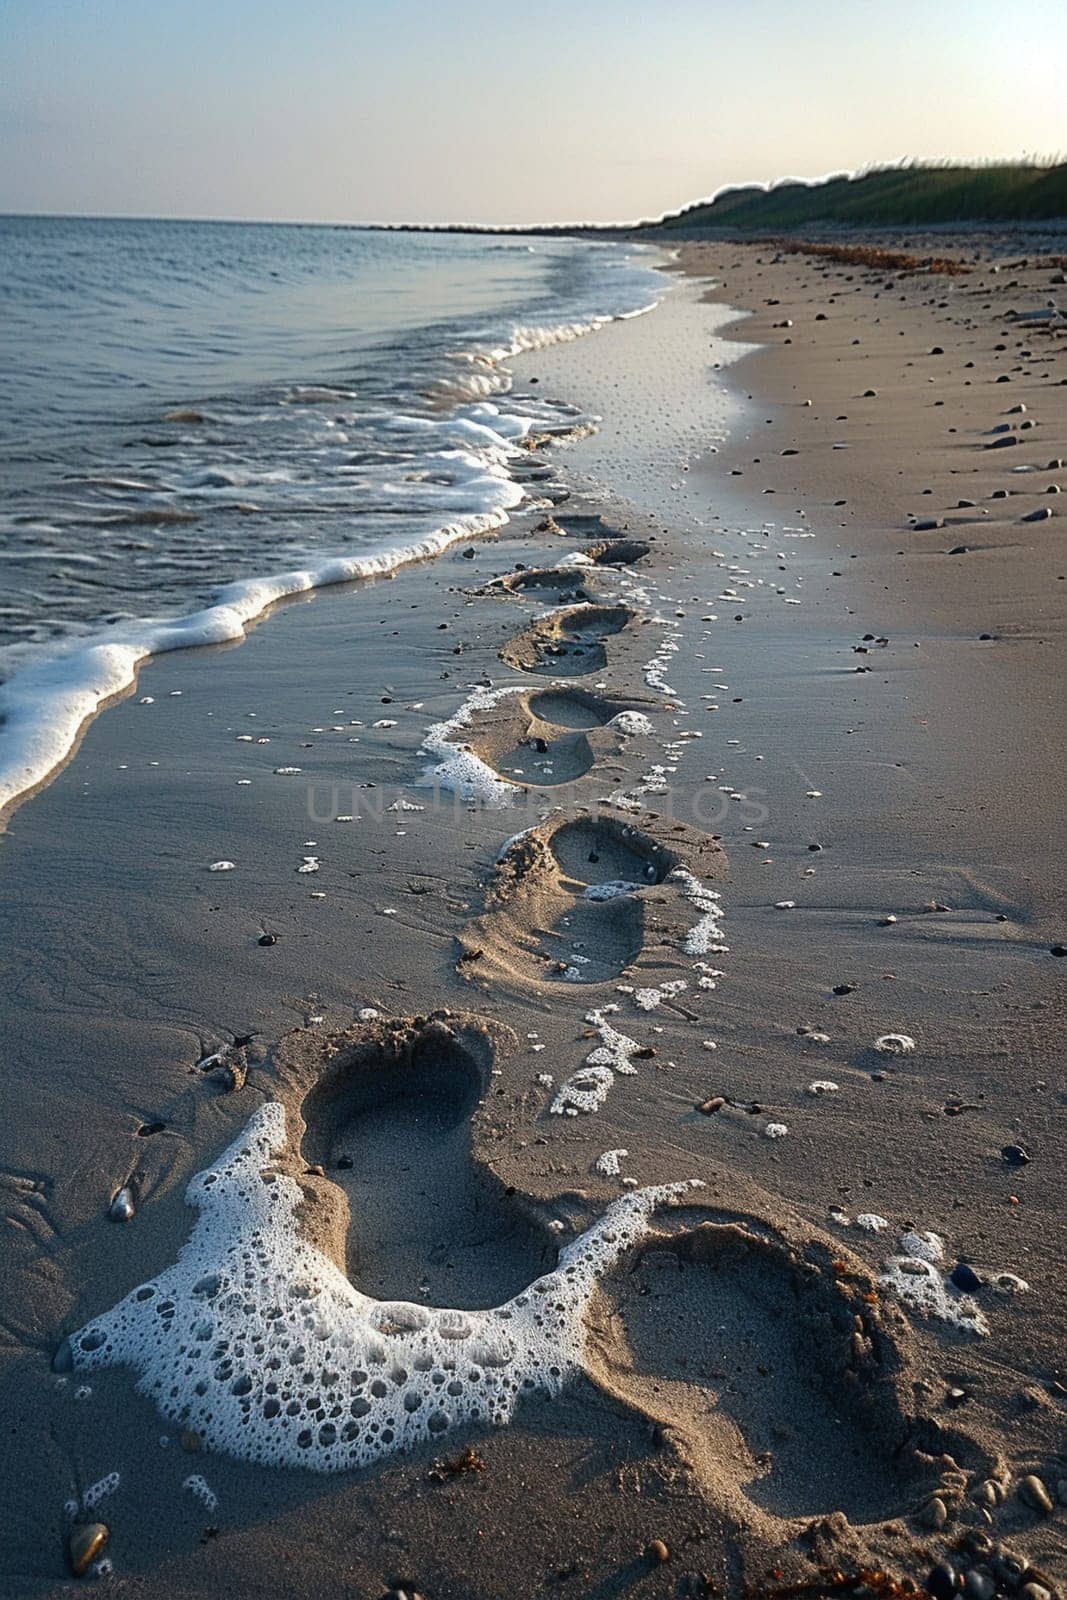 Footsteps in the sand at a peaceful beach, evoking a sense of solitude and reflection